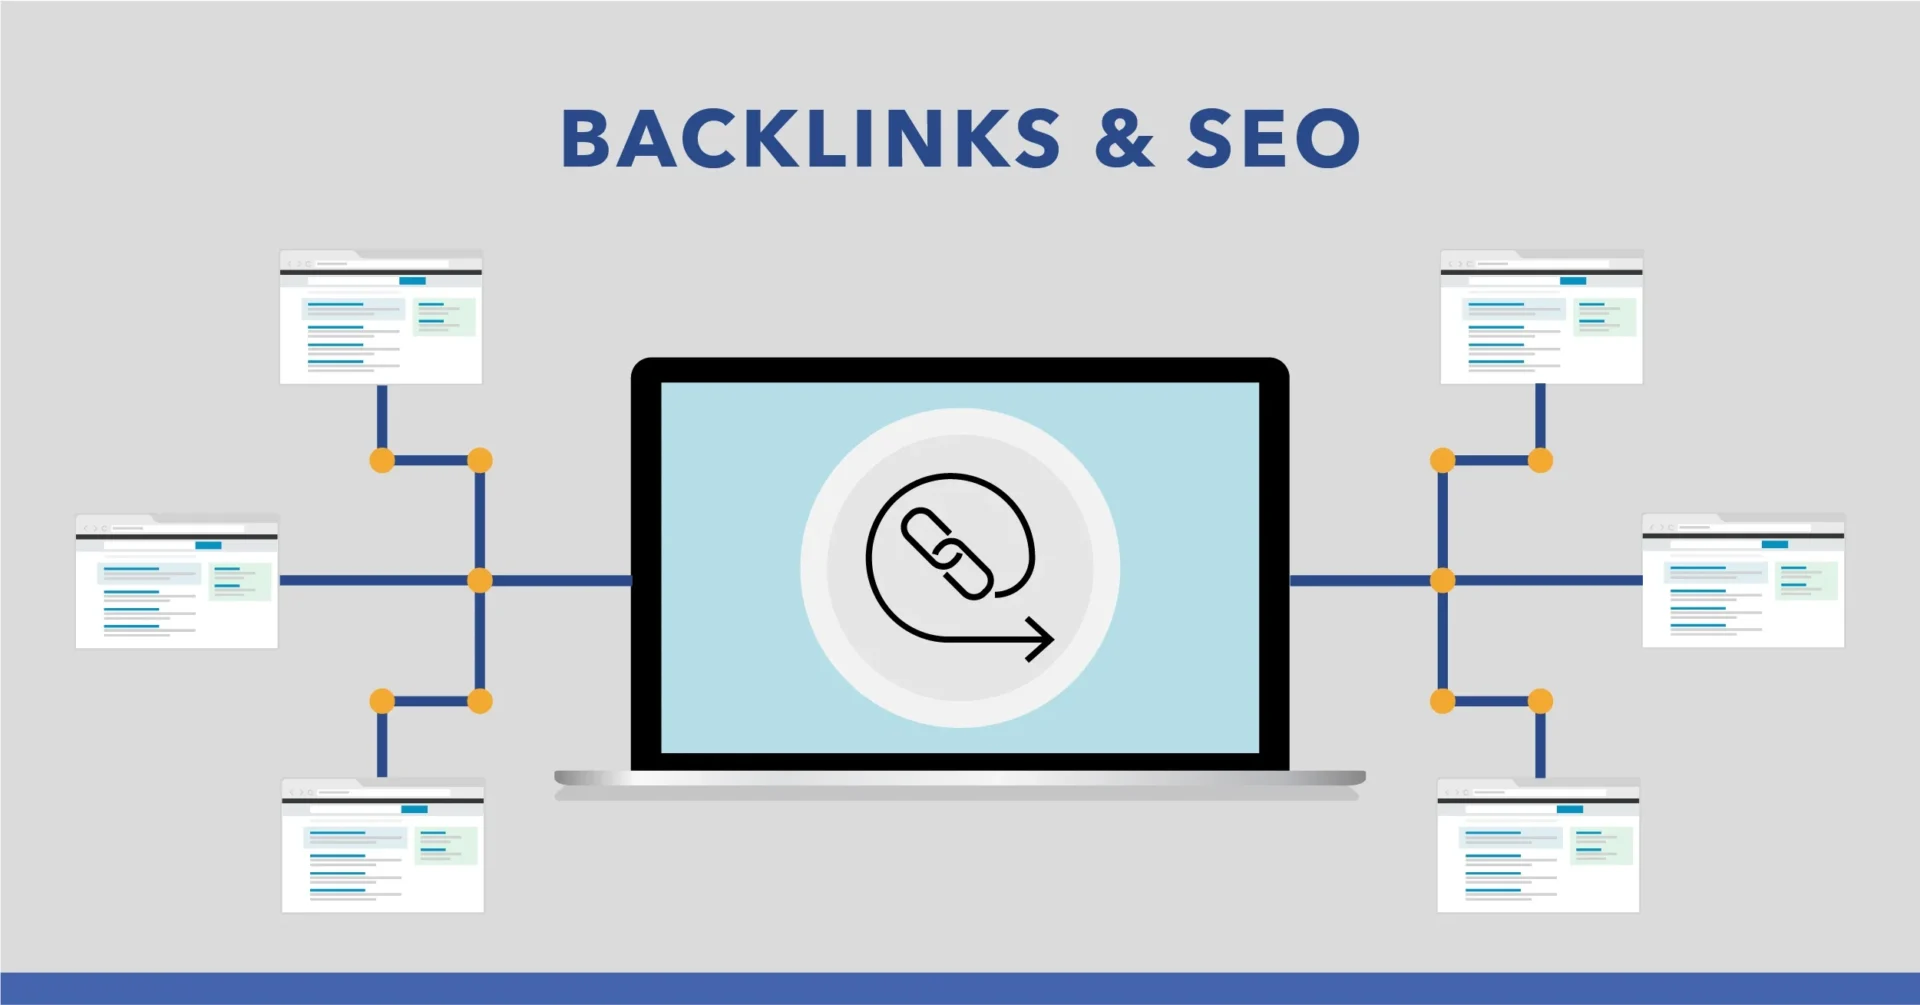 How to Earn Backlinks Ethically While Providing Value for Users?